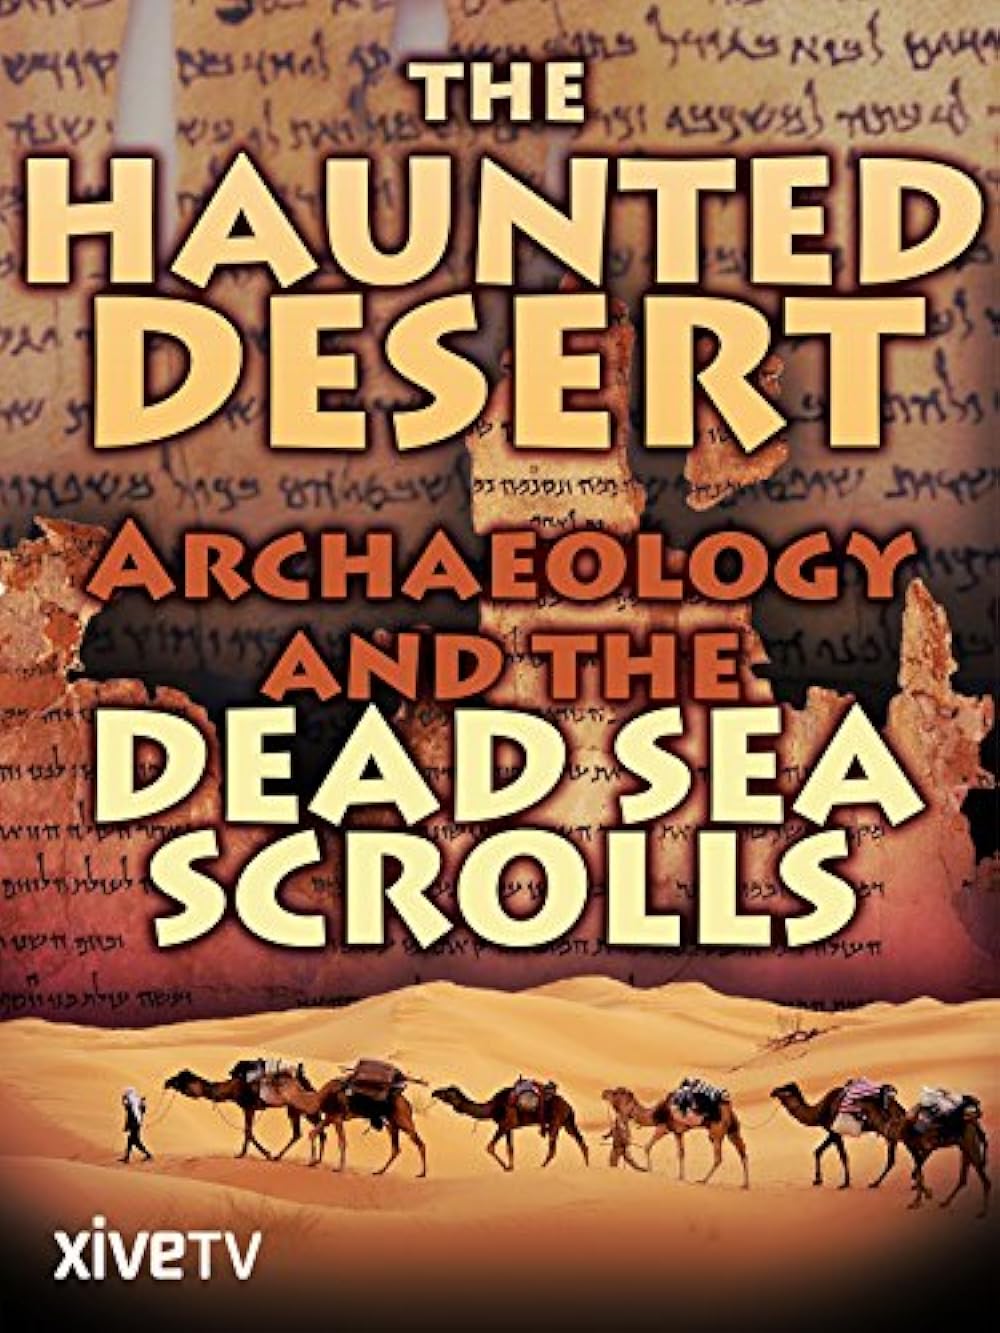 The Haunted Desert - Archeology and the Dead Sea Scrolls ( 2001)